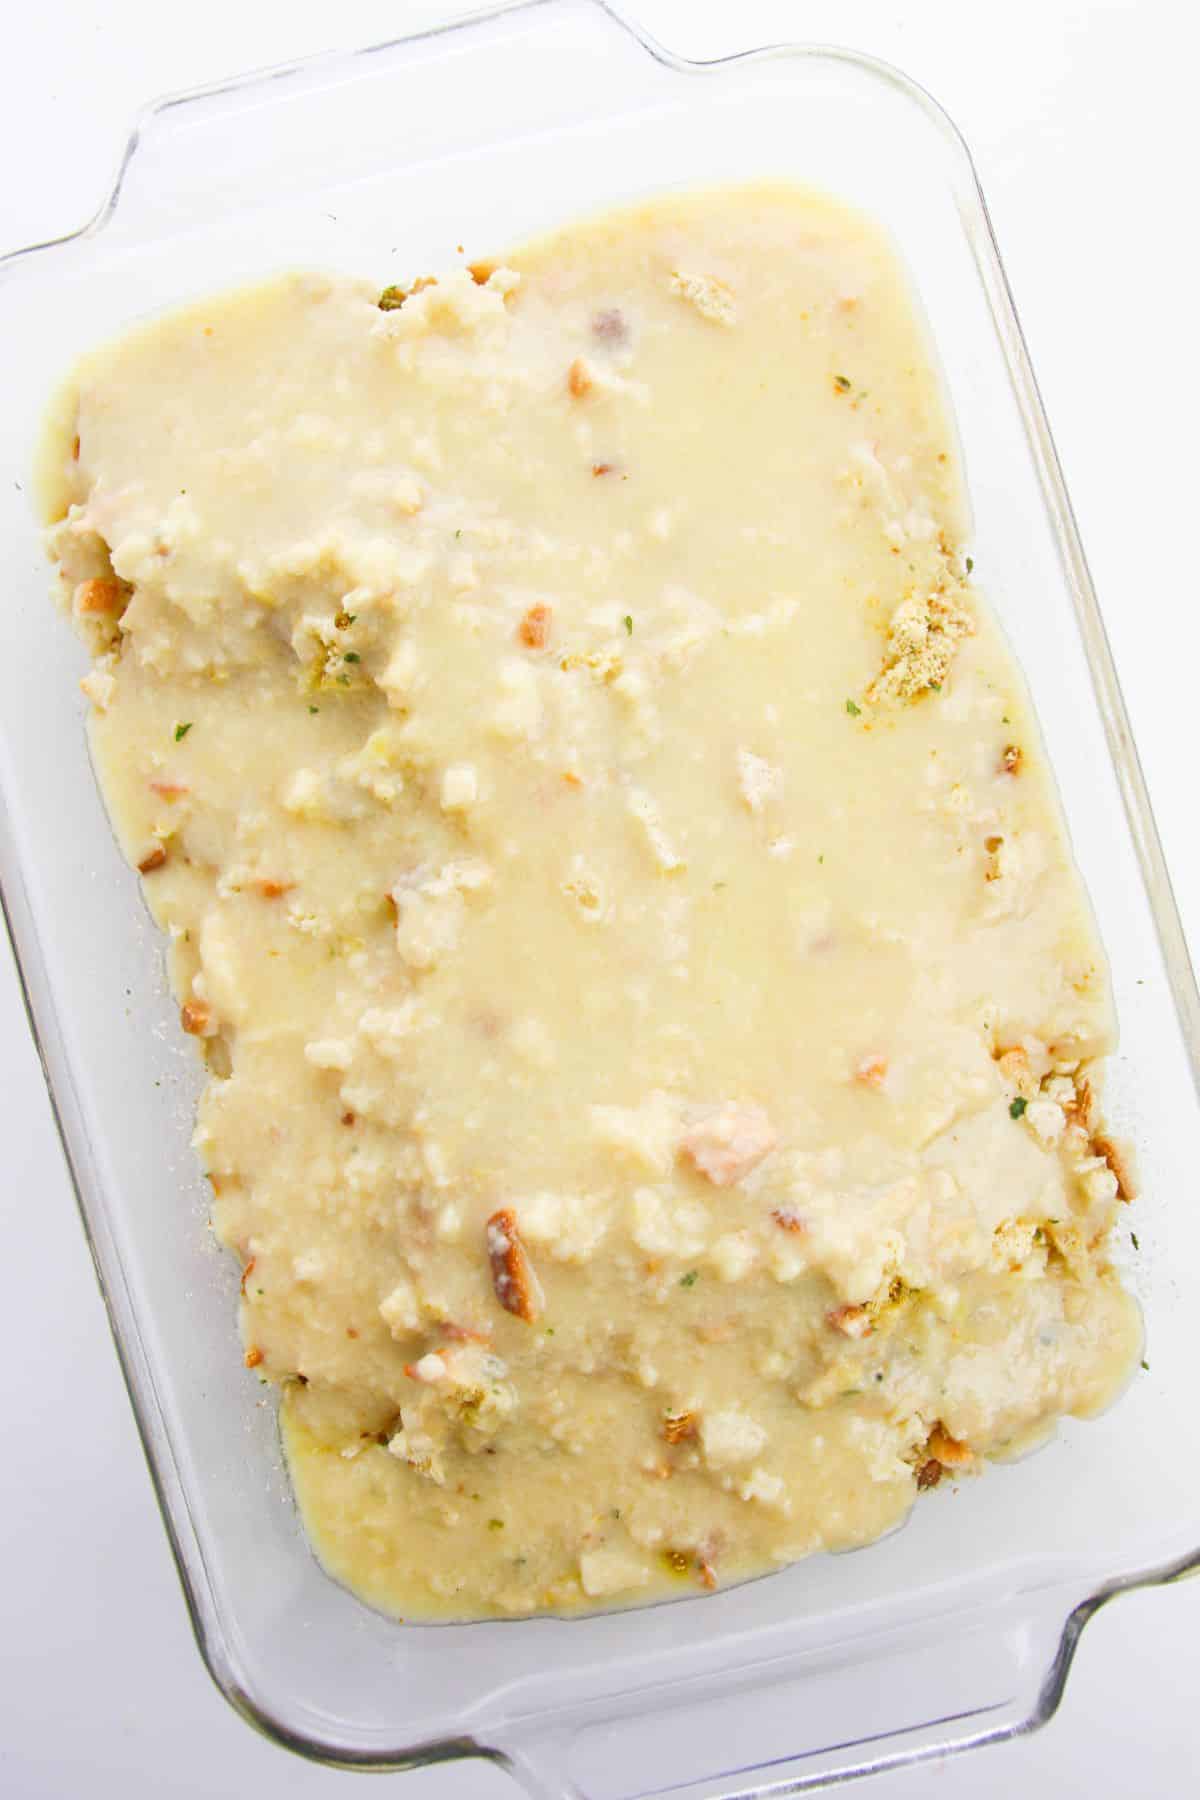 Chicken with sauce mixture in a casserole dish.